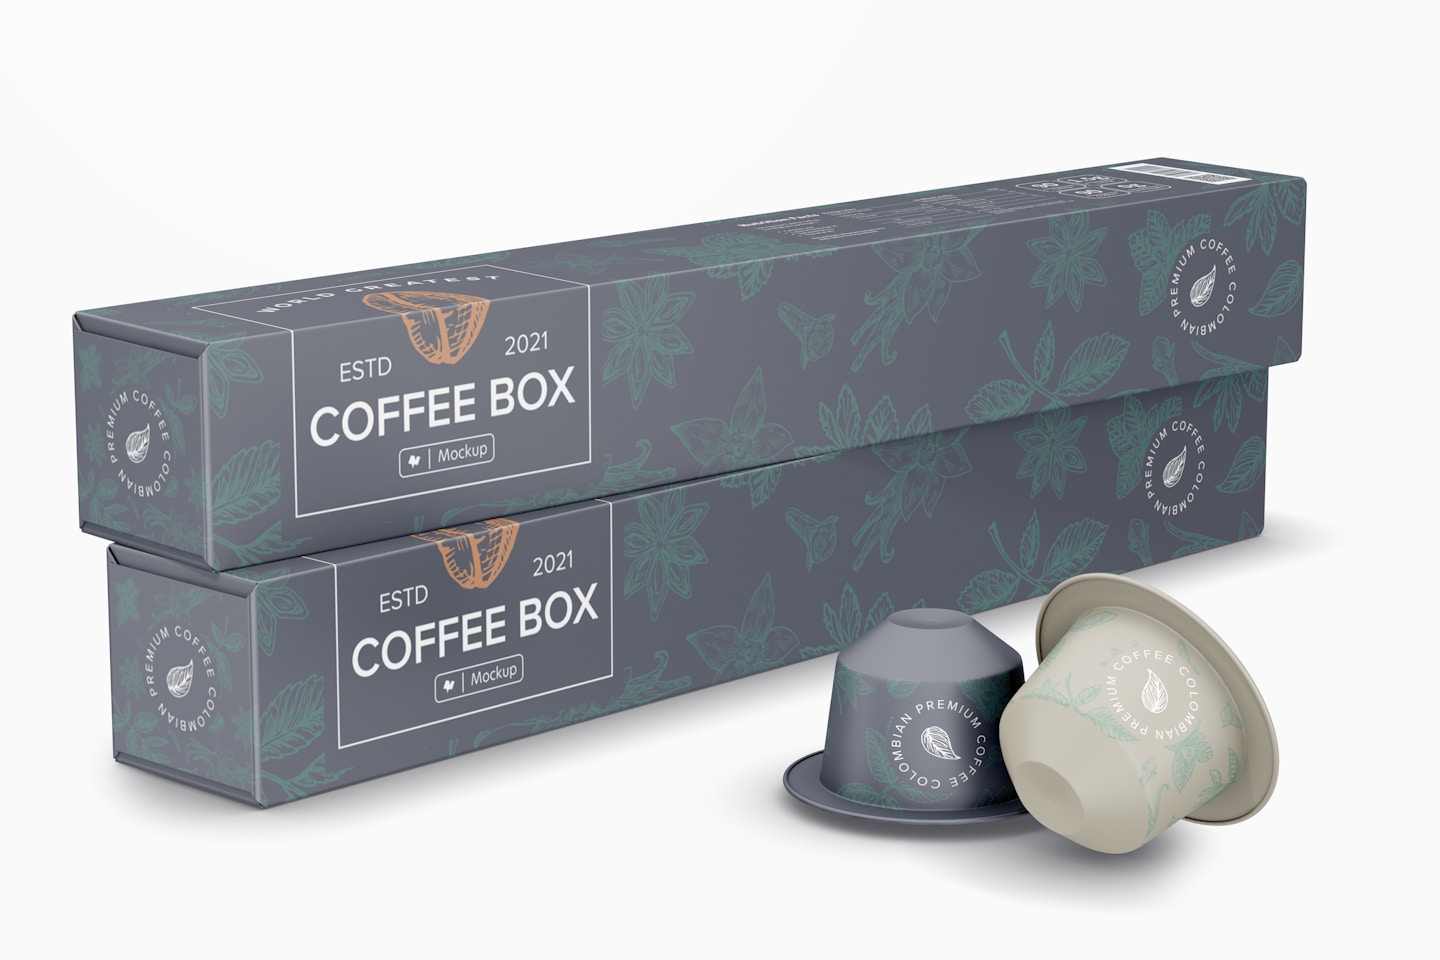 Large Boxes for Coffee Capsule Mockup, Stacked